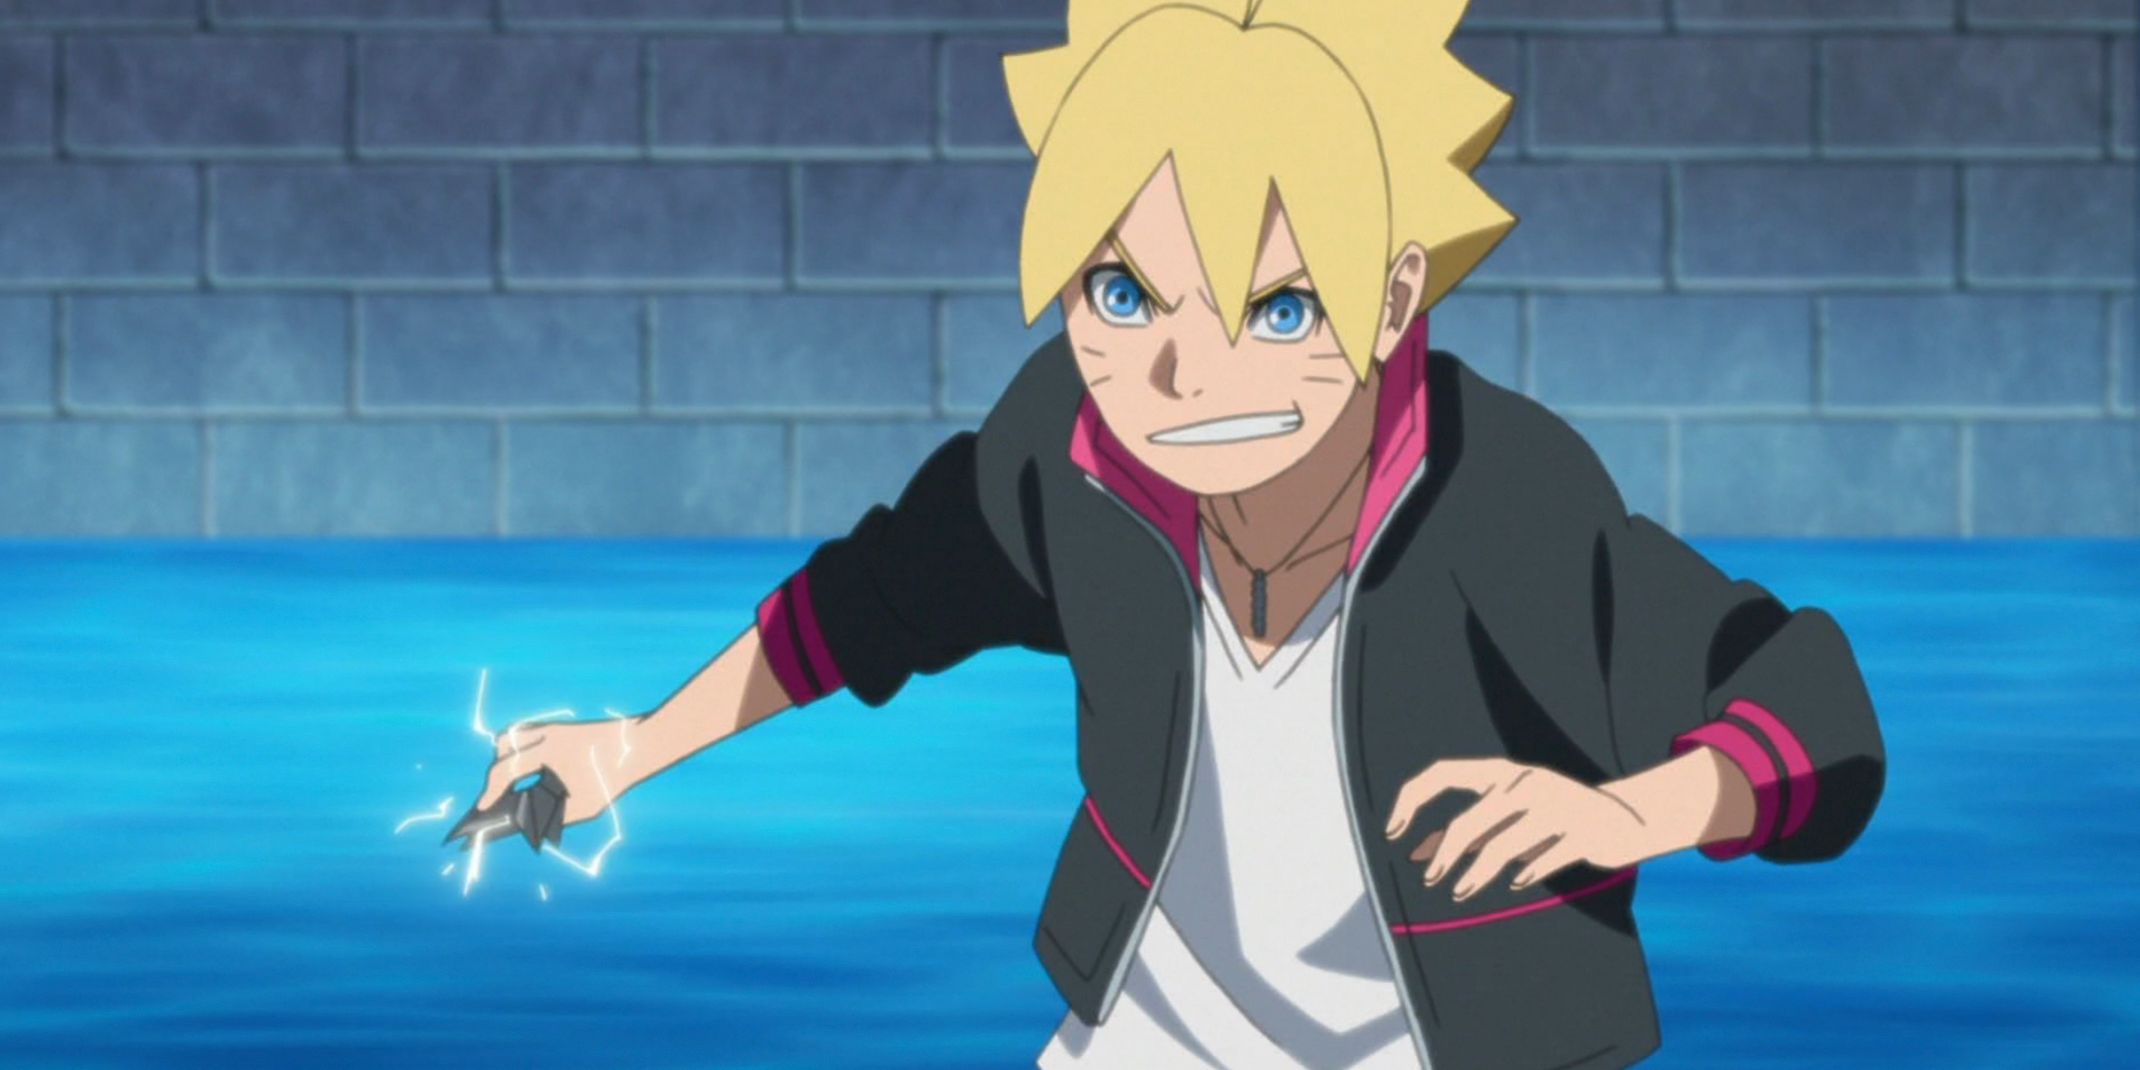 Boruto holds a lightning infused shuriken in his hand in the Boruto anime